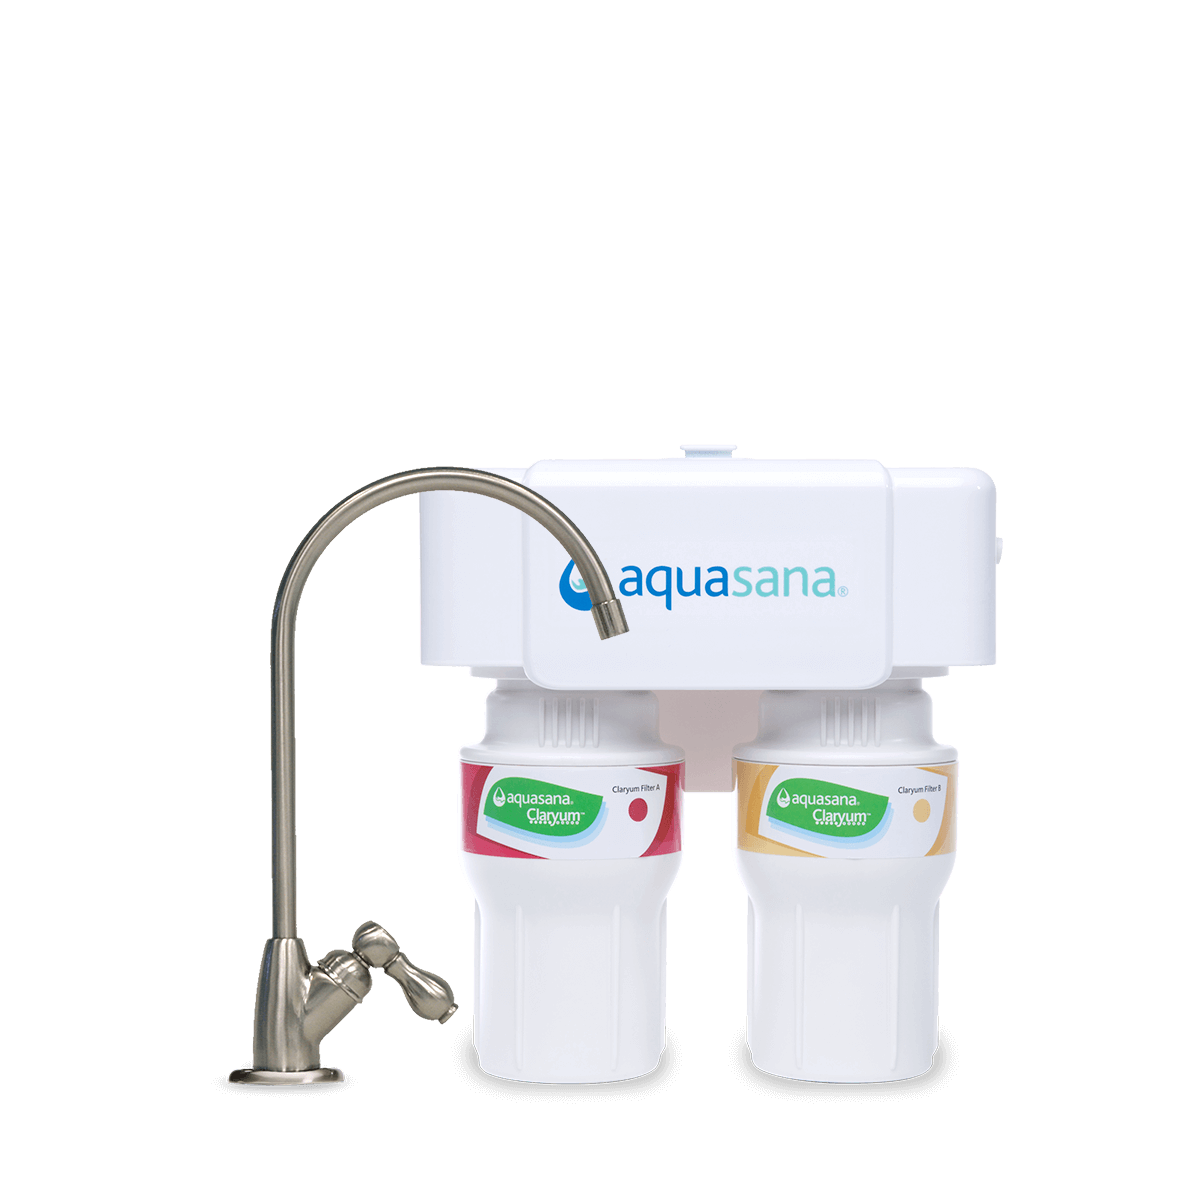 Healthy water drinking filtration products for your home